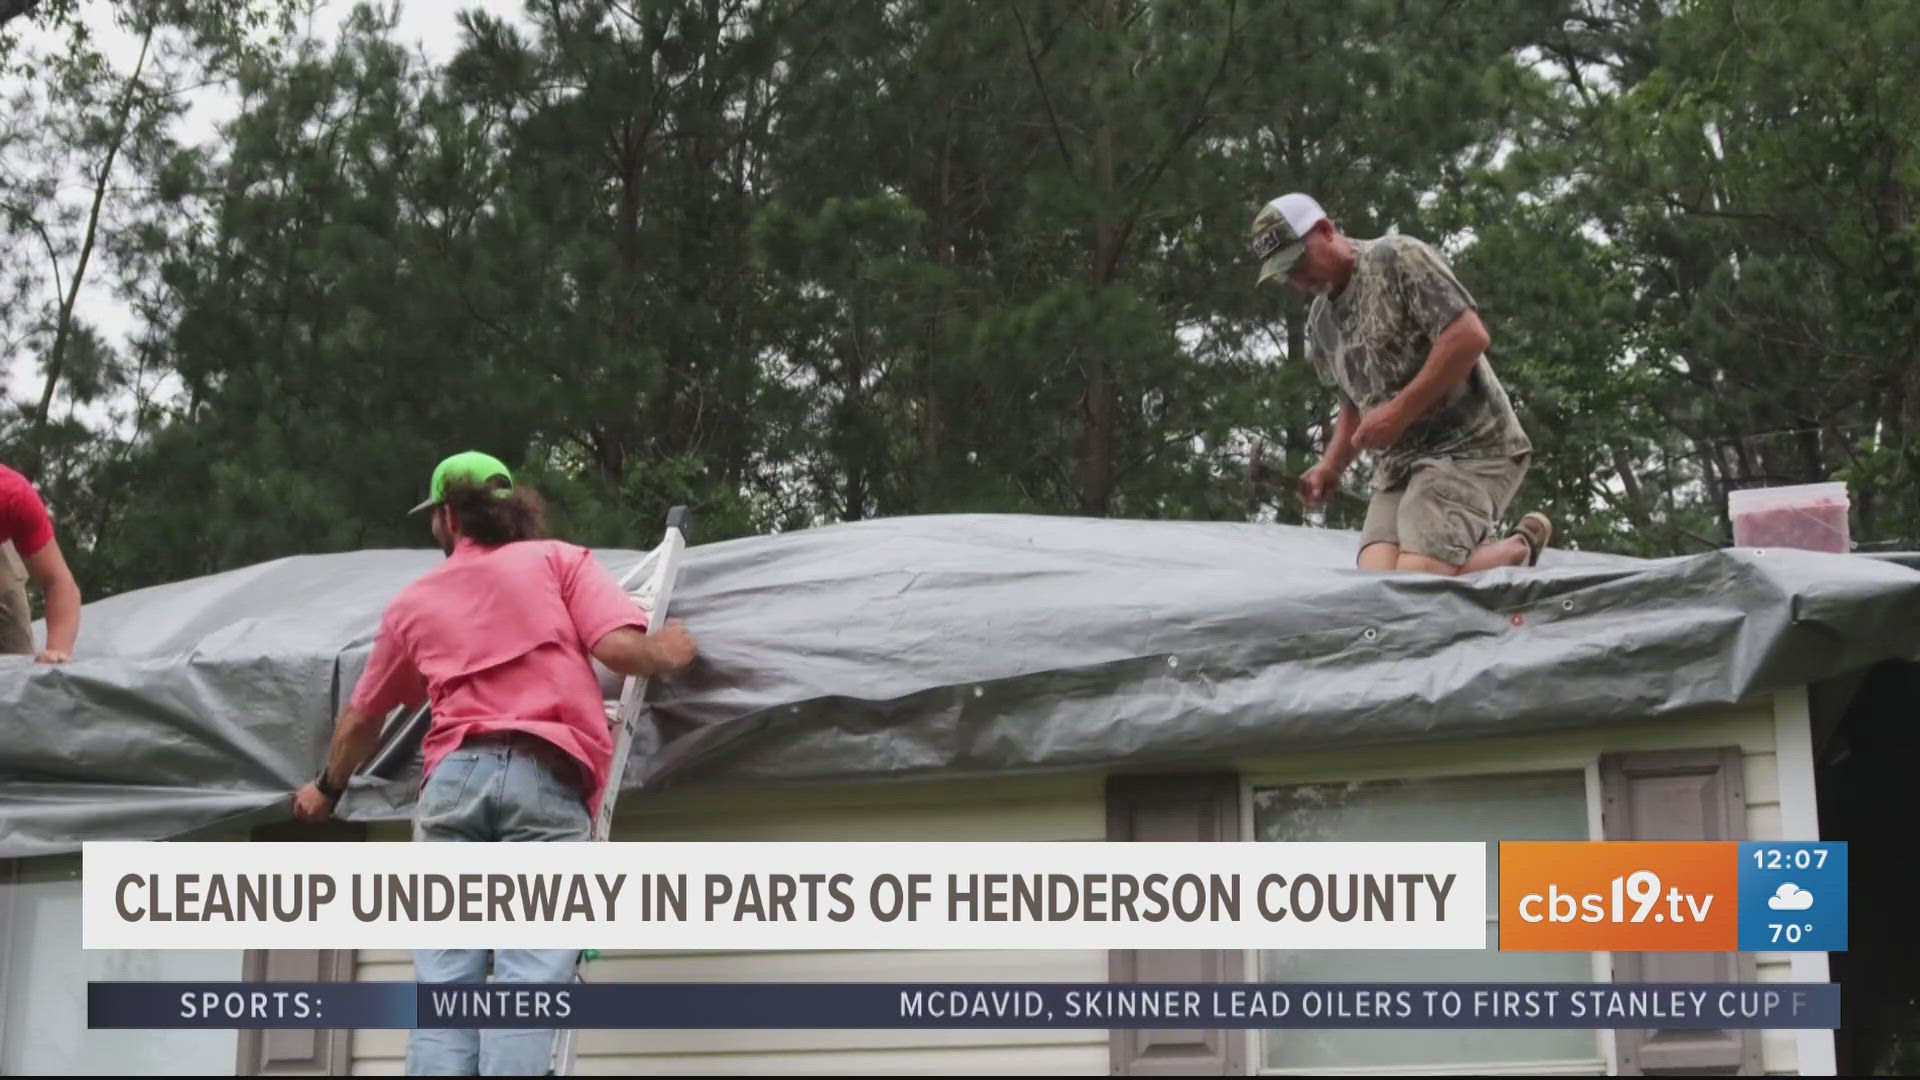 Cleanup efforts underway after severe weather causes tree damage in Henderson County